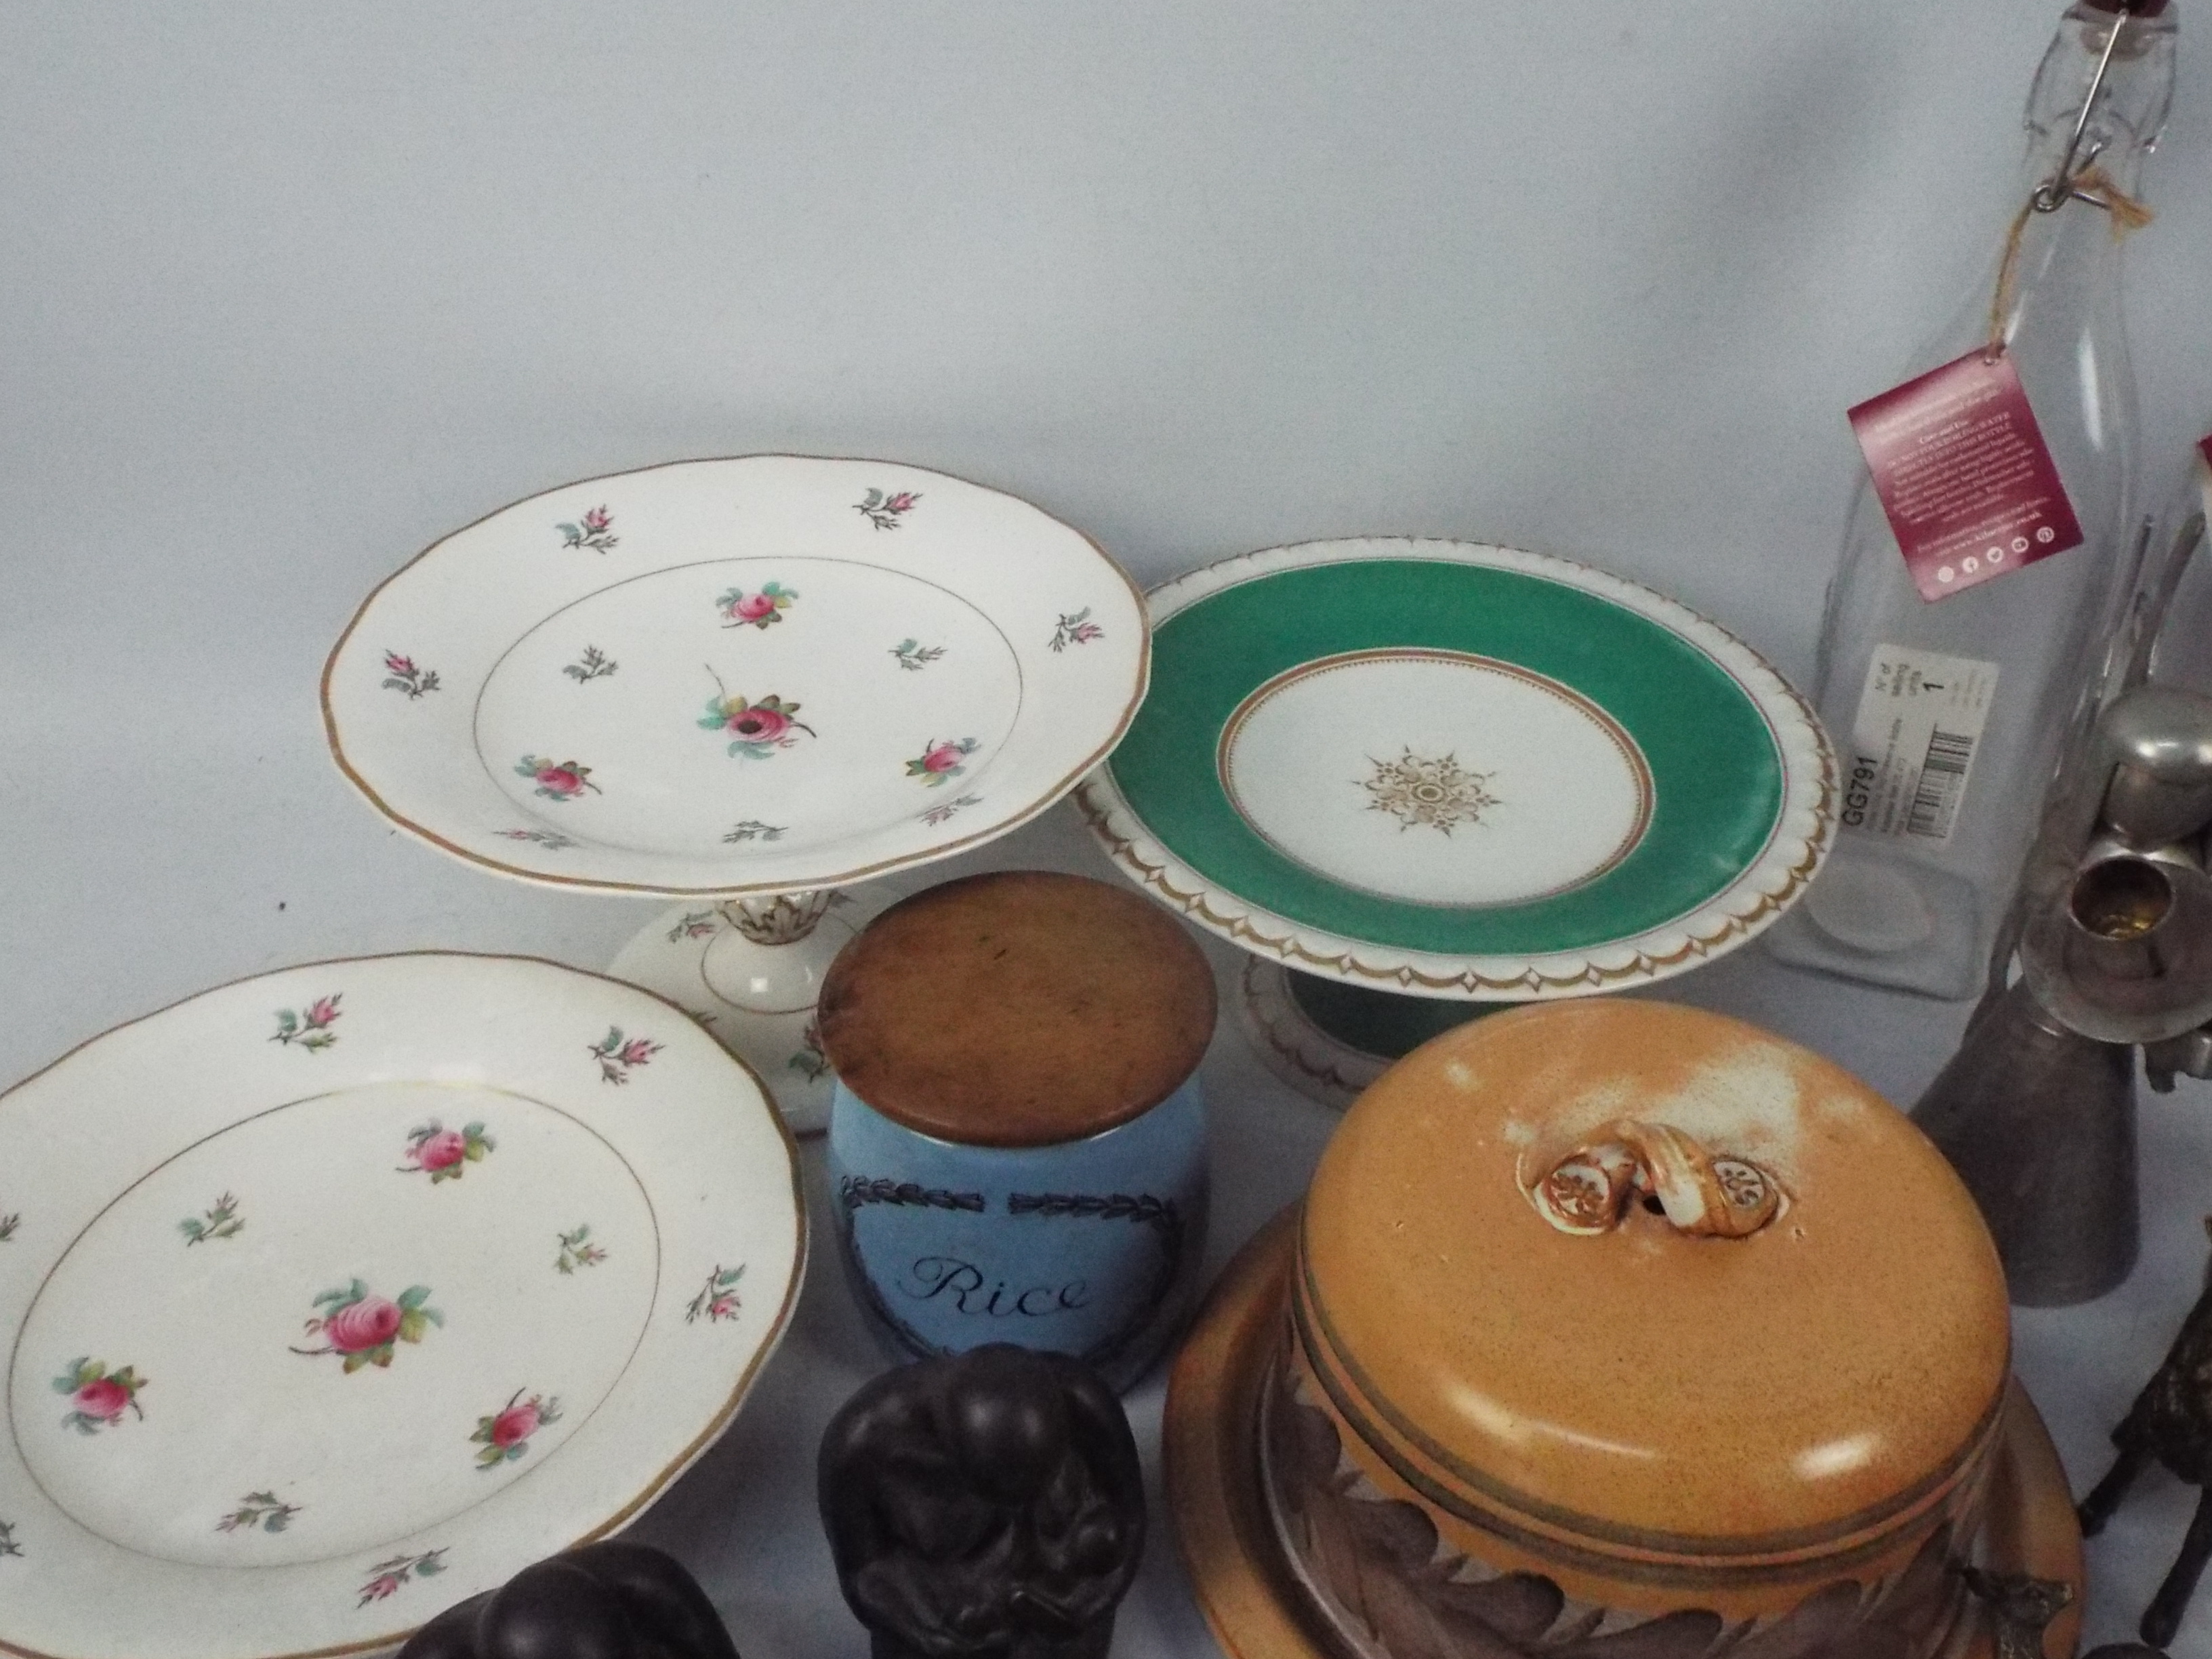 Lot to include glassware, metalware, cer - Image 4 of 5